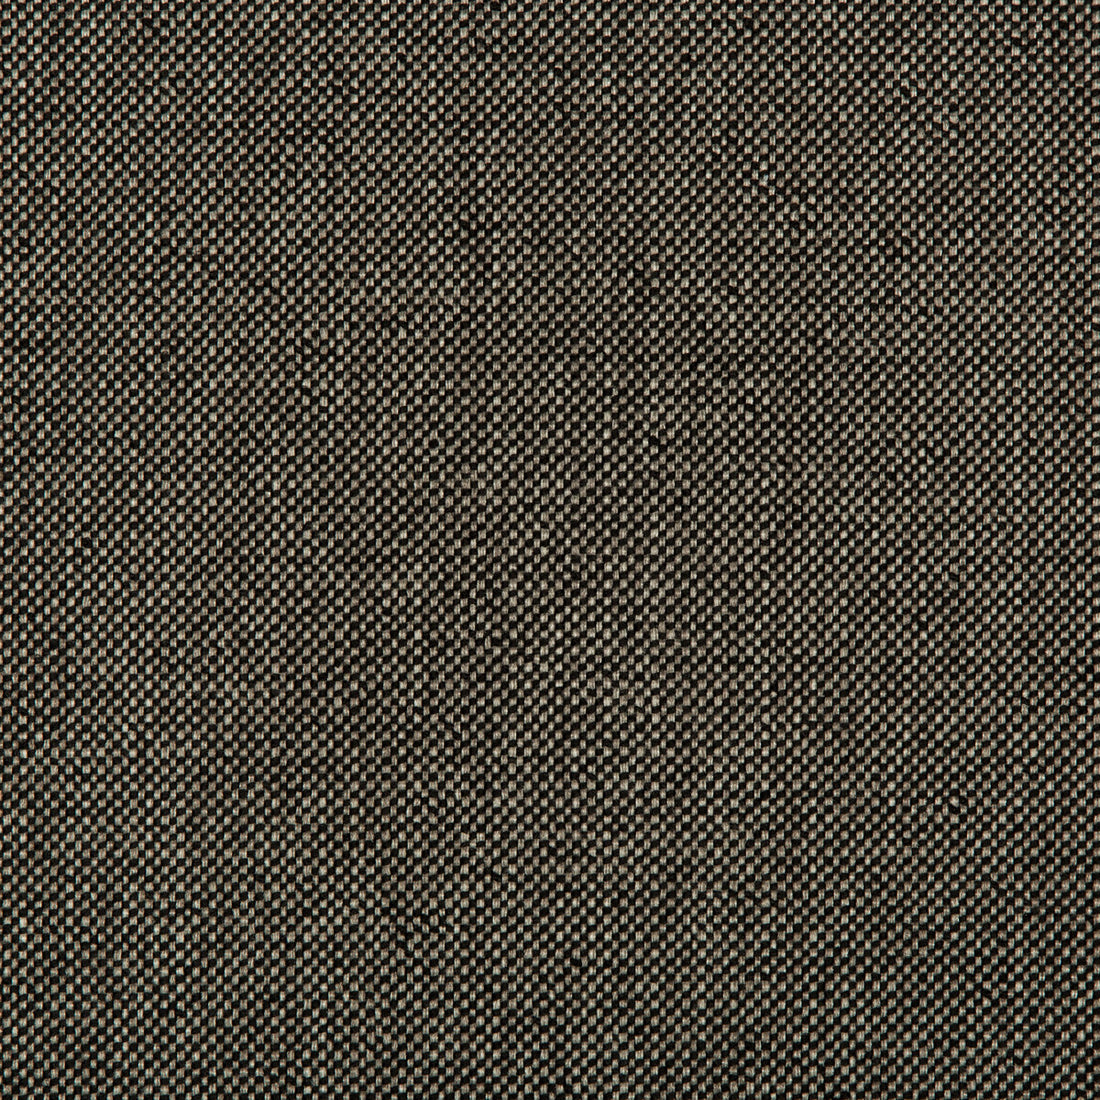 Williams fabric in obsidian color - pattern 35744.811.0 - by Kravet Contract in the Value Kravetarmor collection